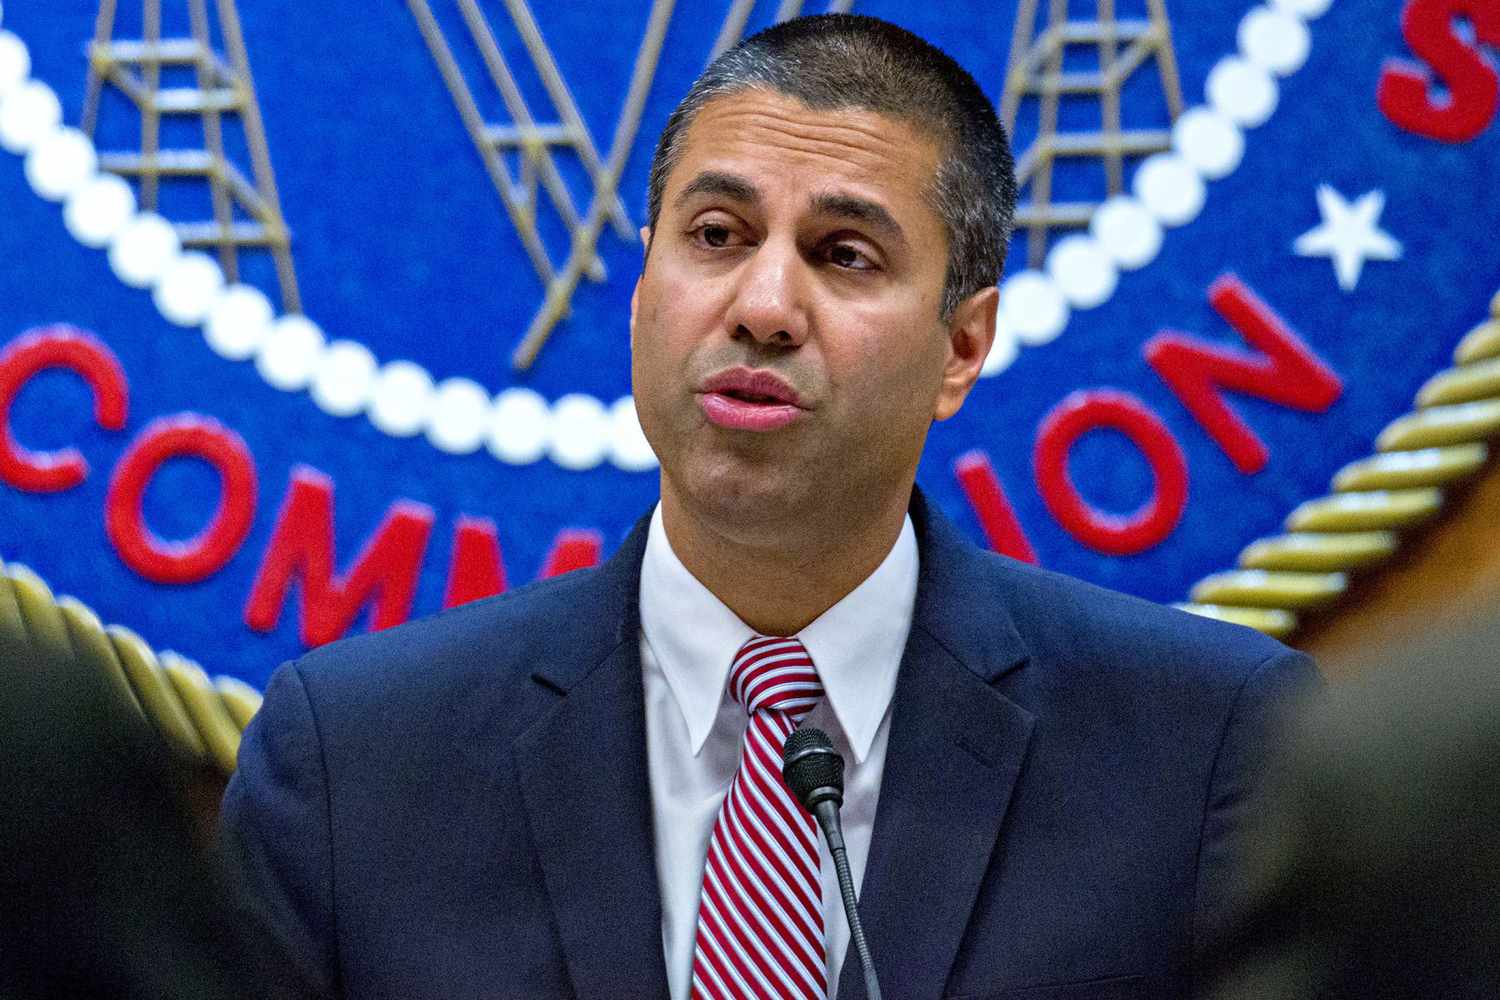 The Federal Communications Commission Holds Open Meeting And Votes On Net Neutrality Rules